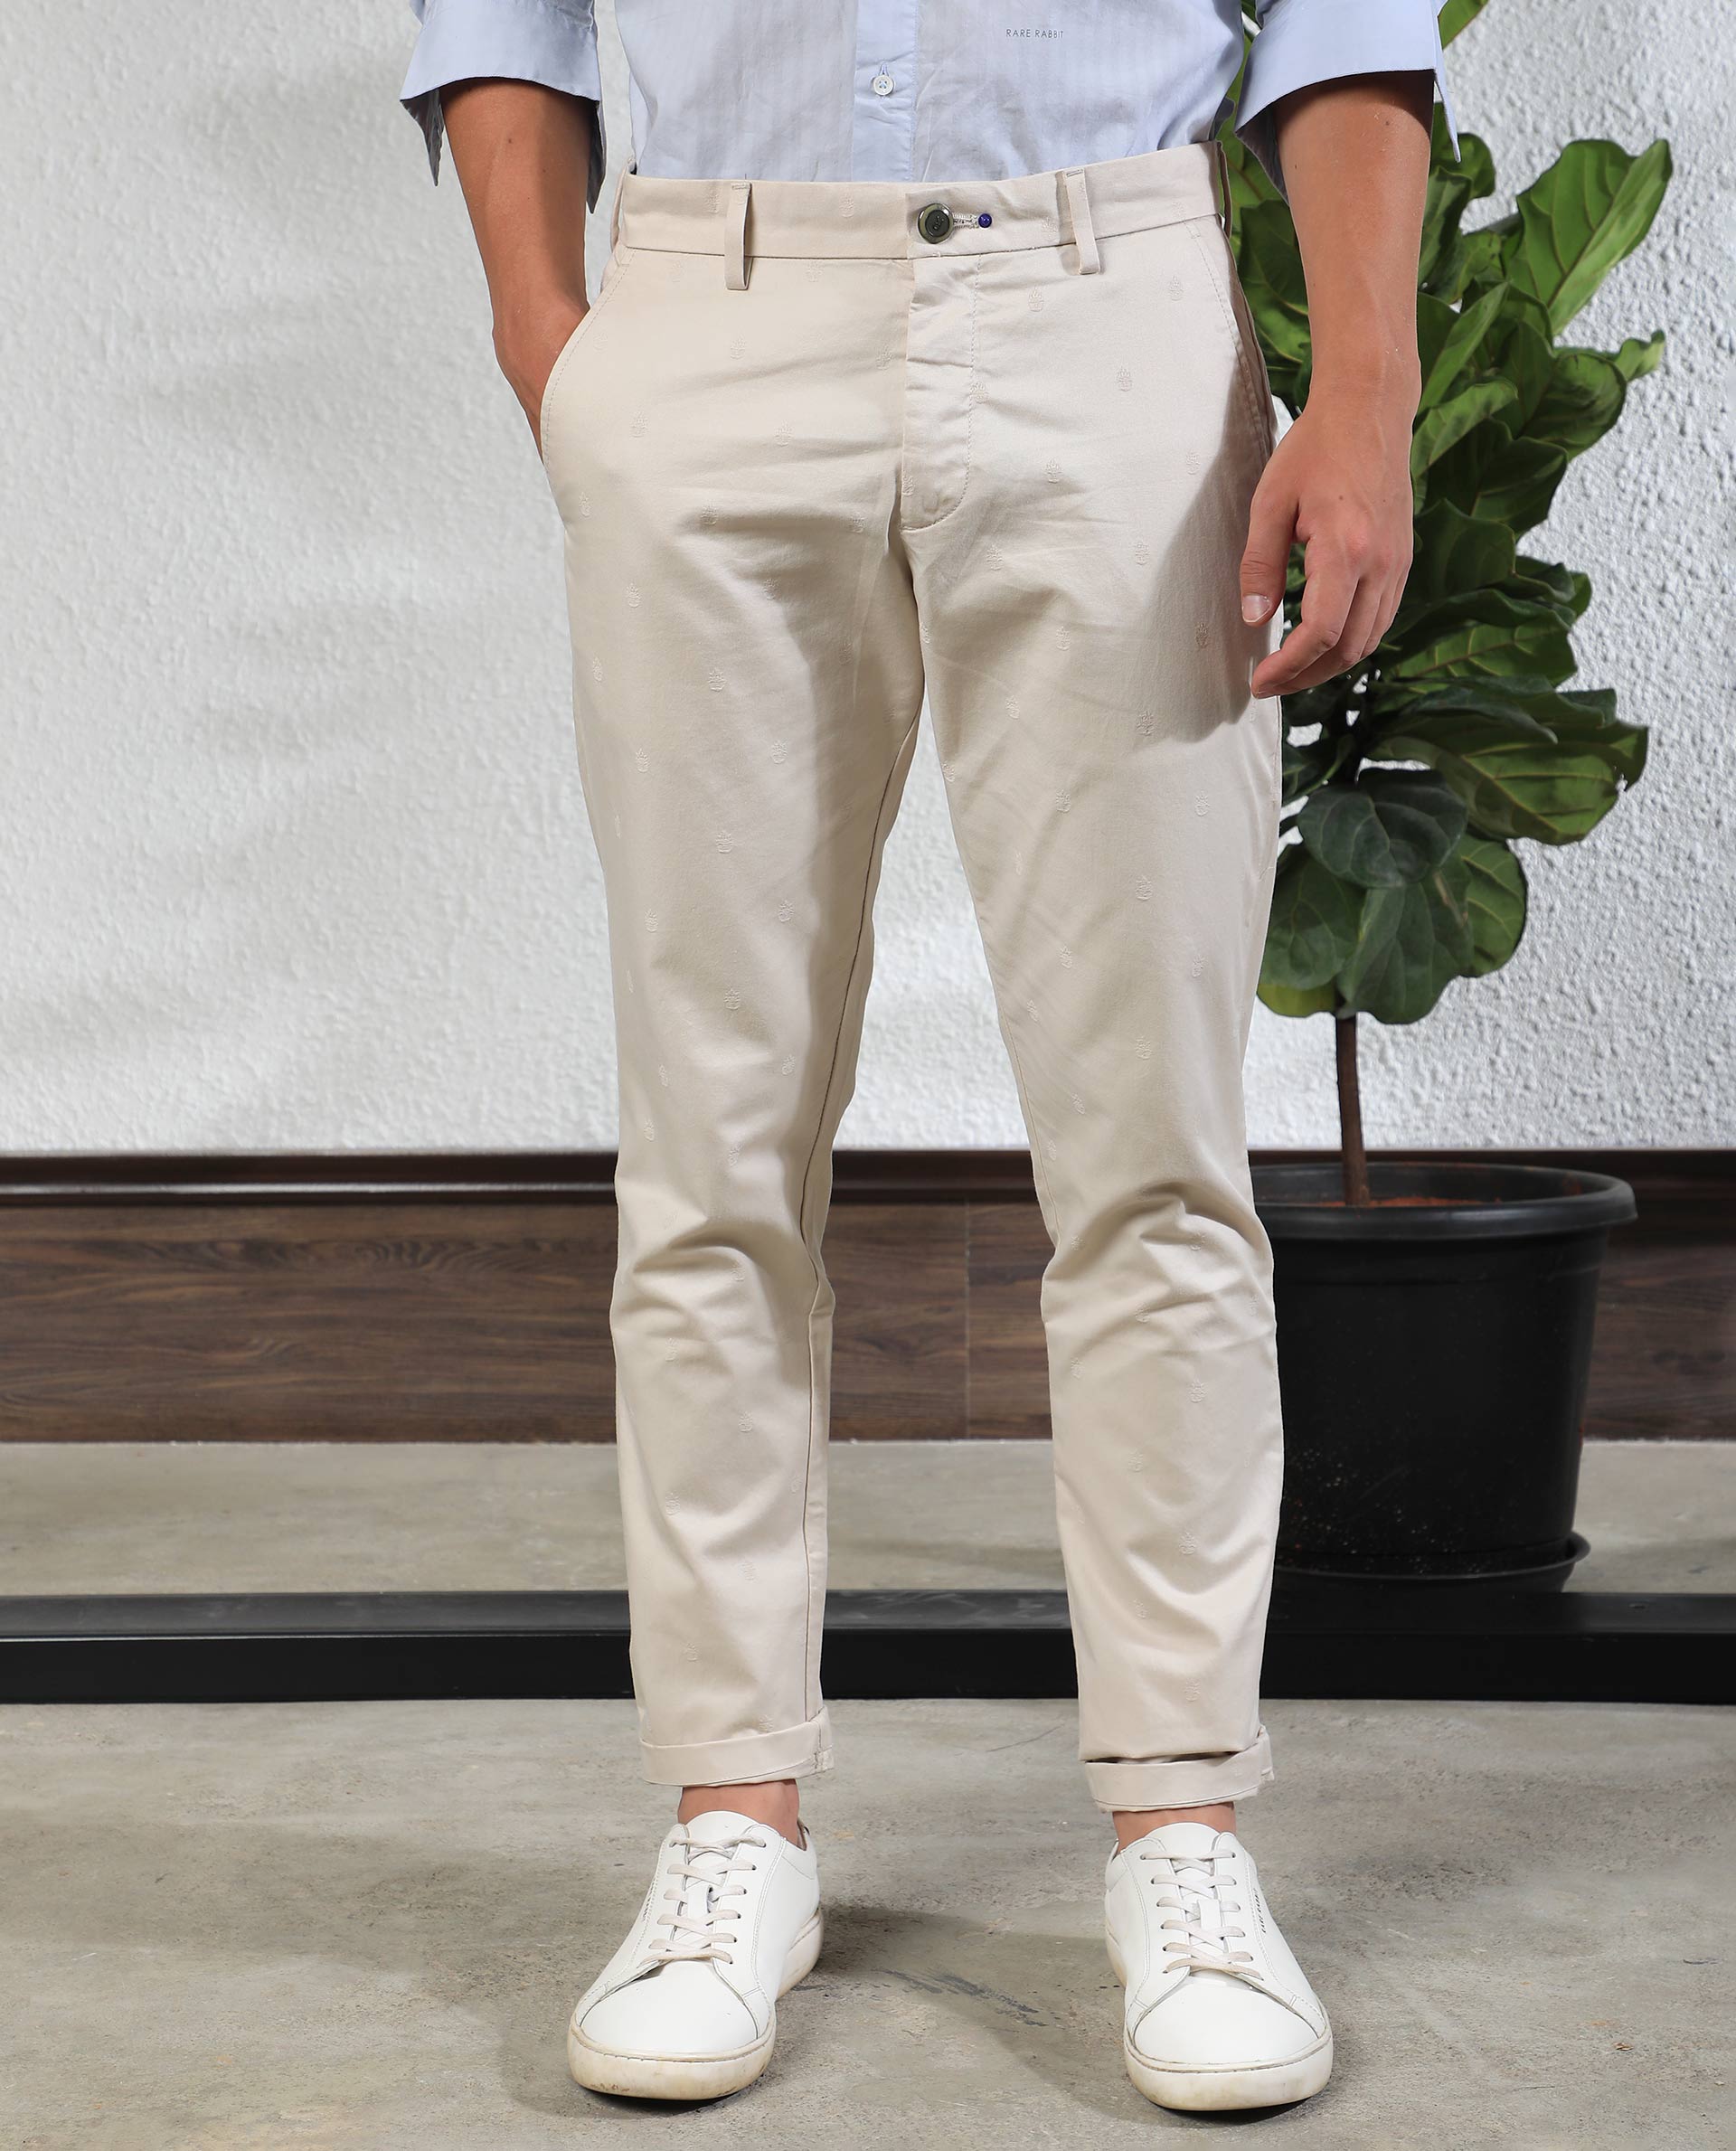 How To Style Your Beige Or Nude Pants